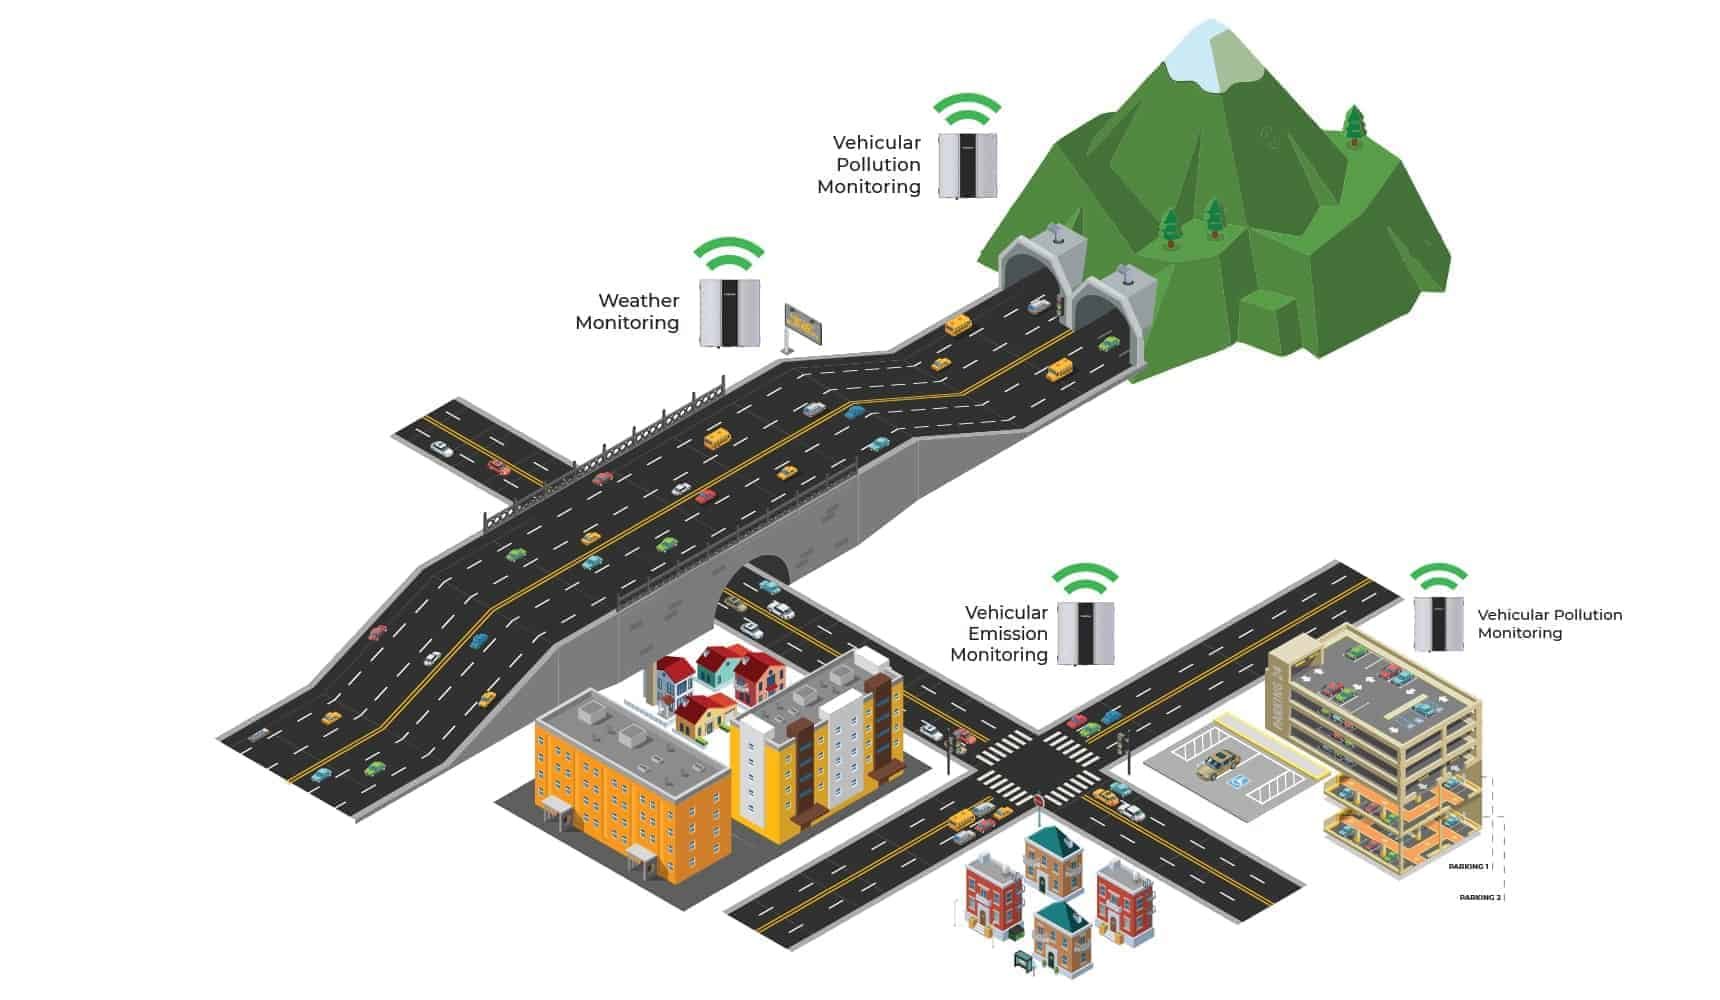 Oizom deploys its Outdoor Air Pollution Monitor for pollution and weather monitoring on Roads, Highway, Tunnel and Parking areas.